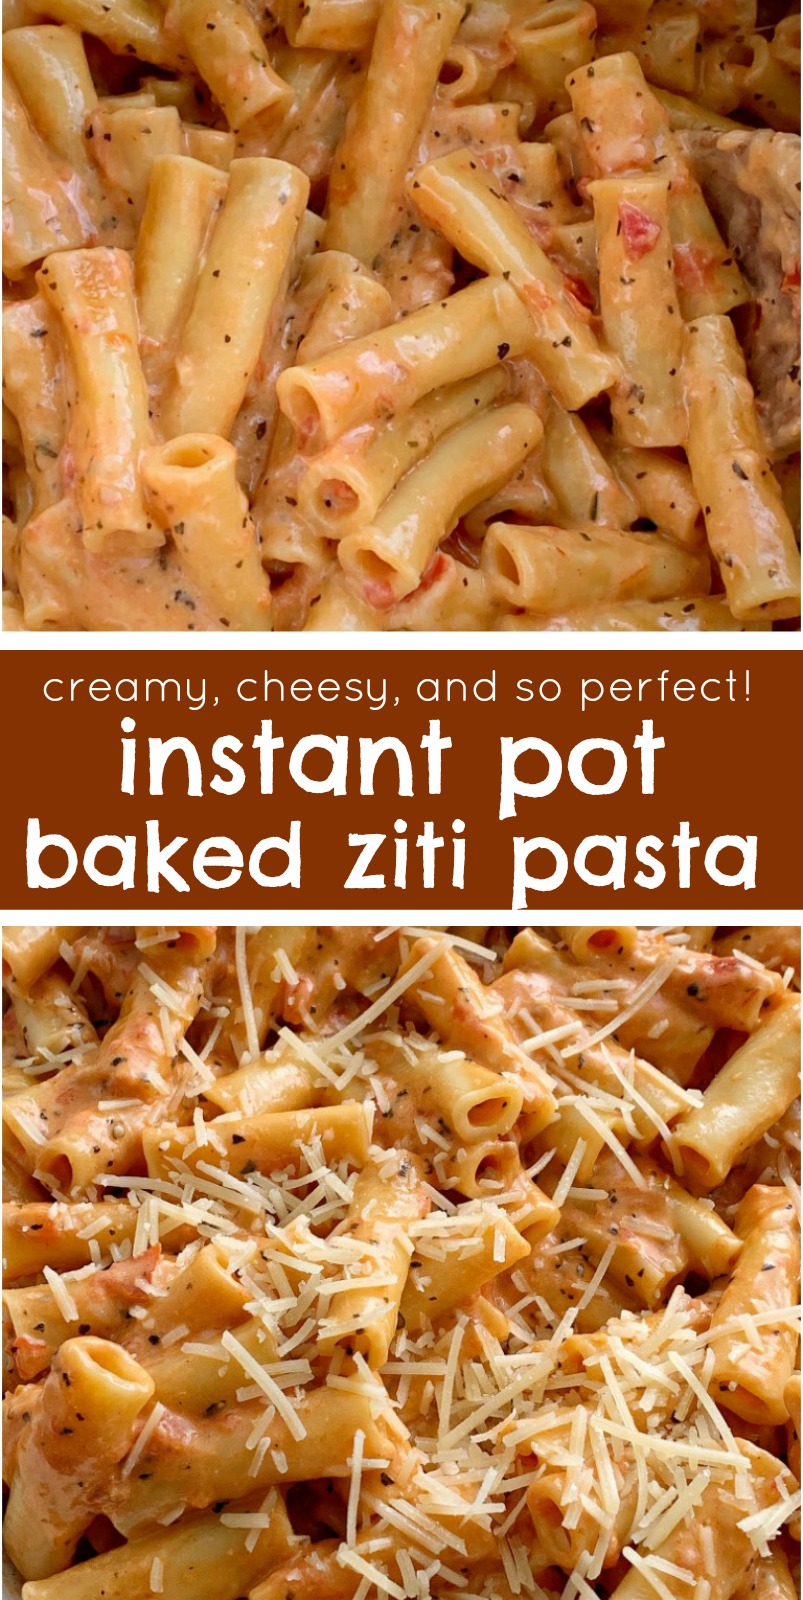 Perfect Instant Pot Baked Ziti | Instant Pot Recipe | Pressure Cooker | Baked Ziti | Baked Ziti is a family favorite dinner that's made even easier when you "bake" it in an Instant Pot! 15 minutes start to finish and only a few simple ingredients. Your family will love this perfect cheesy baked ziti recipe. #instantpotrecipes #pressurecooker #easyrecipe #dinnerideas #pasta #dinner